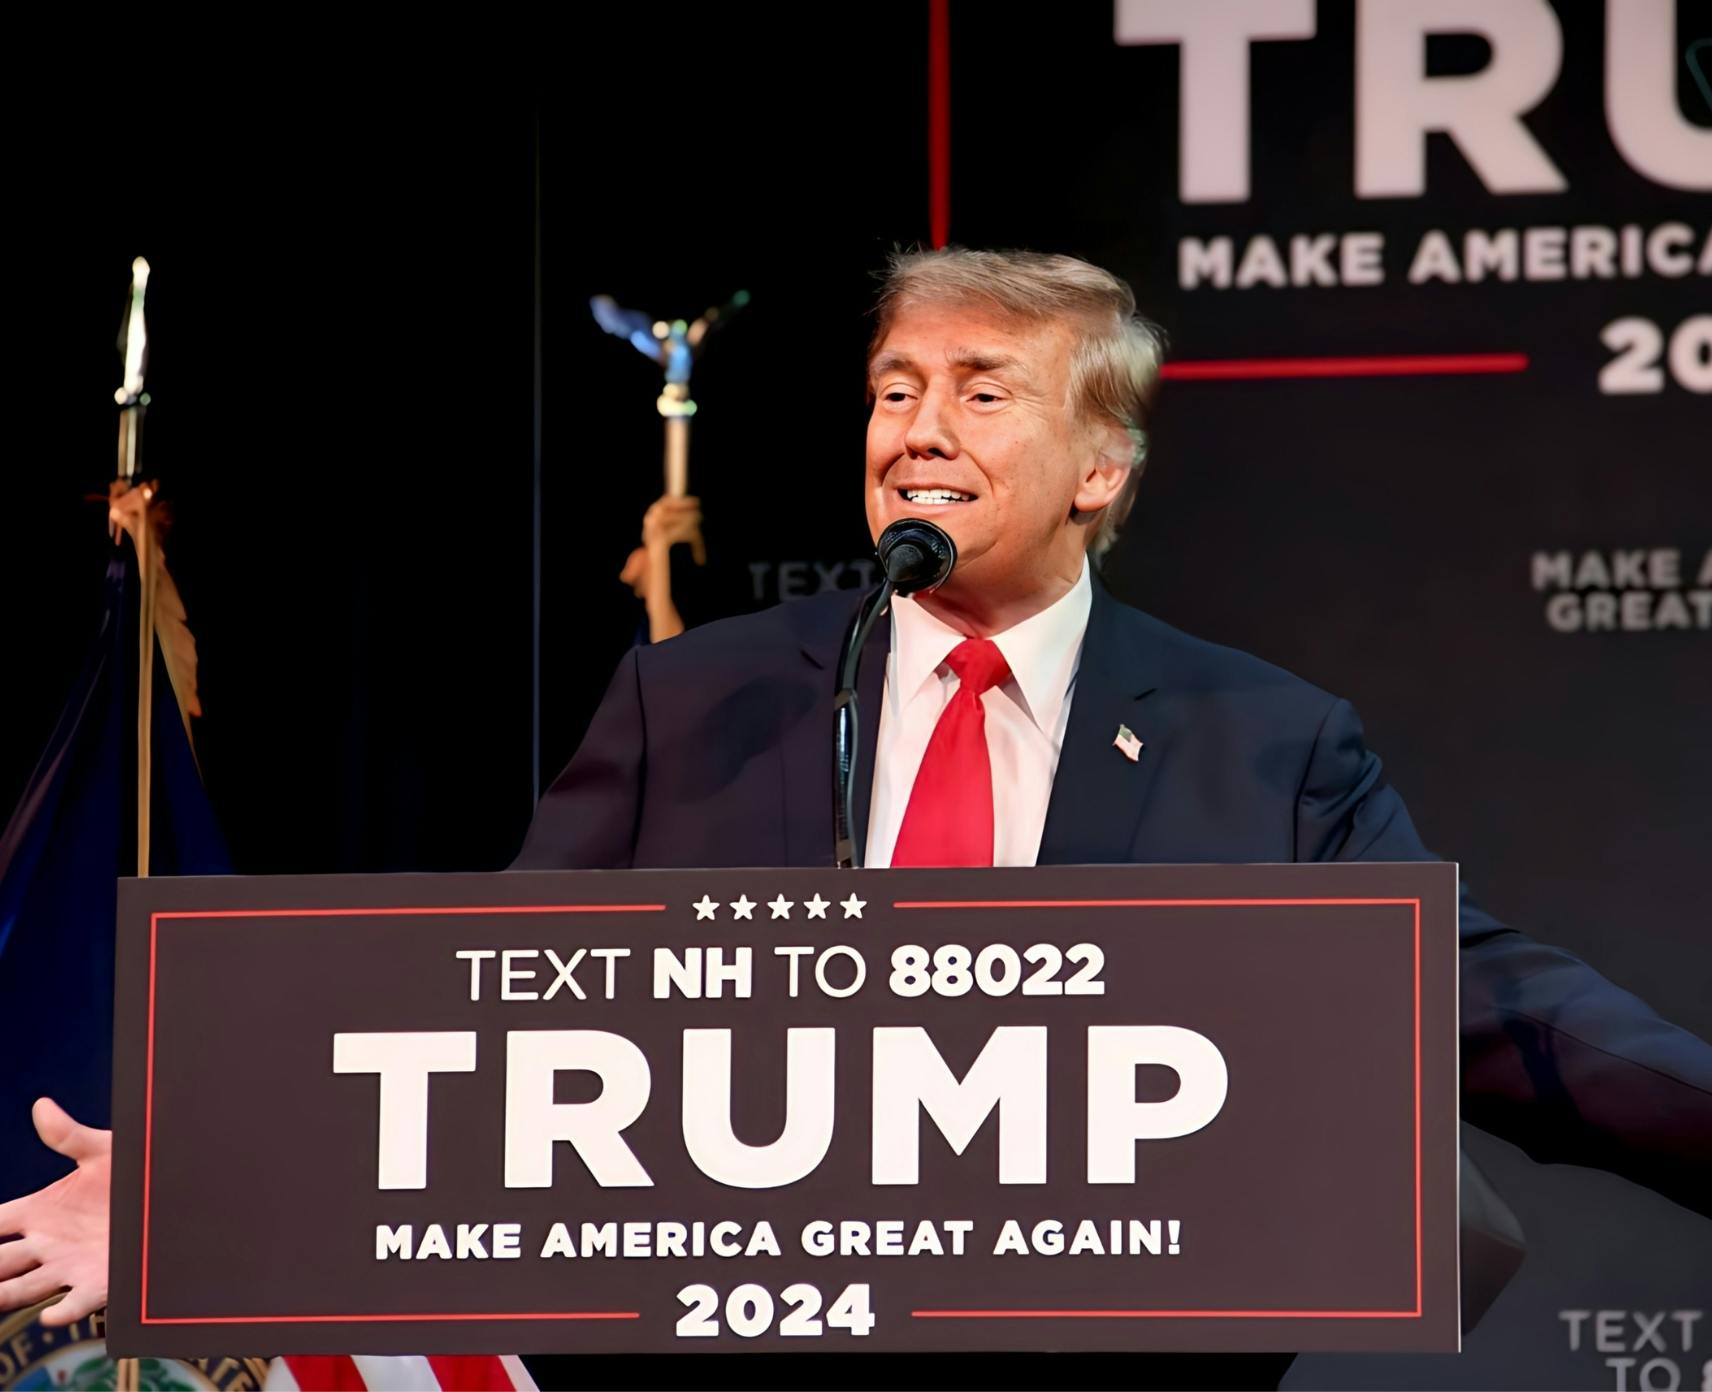 Former President Donald Trump speaks at a campaign event on 2 February 2024.